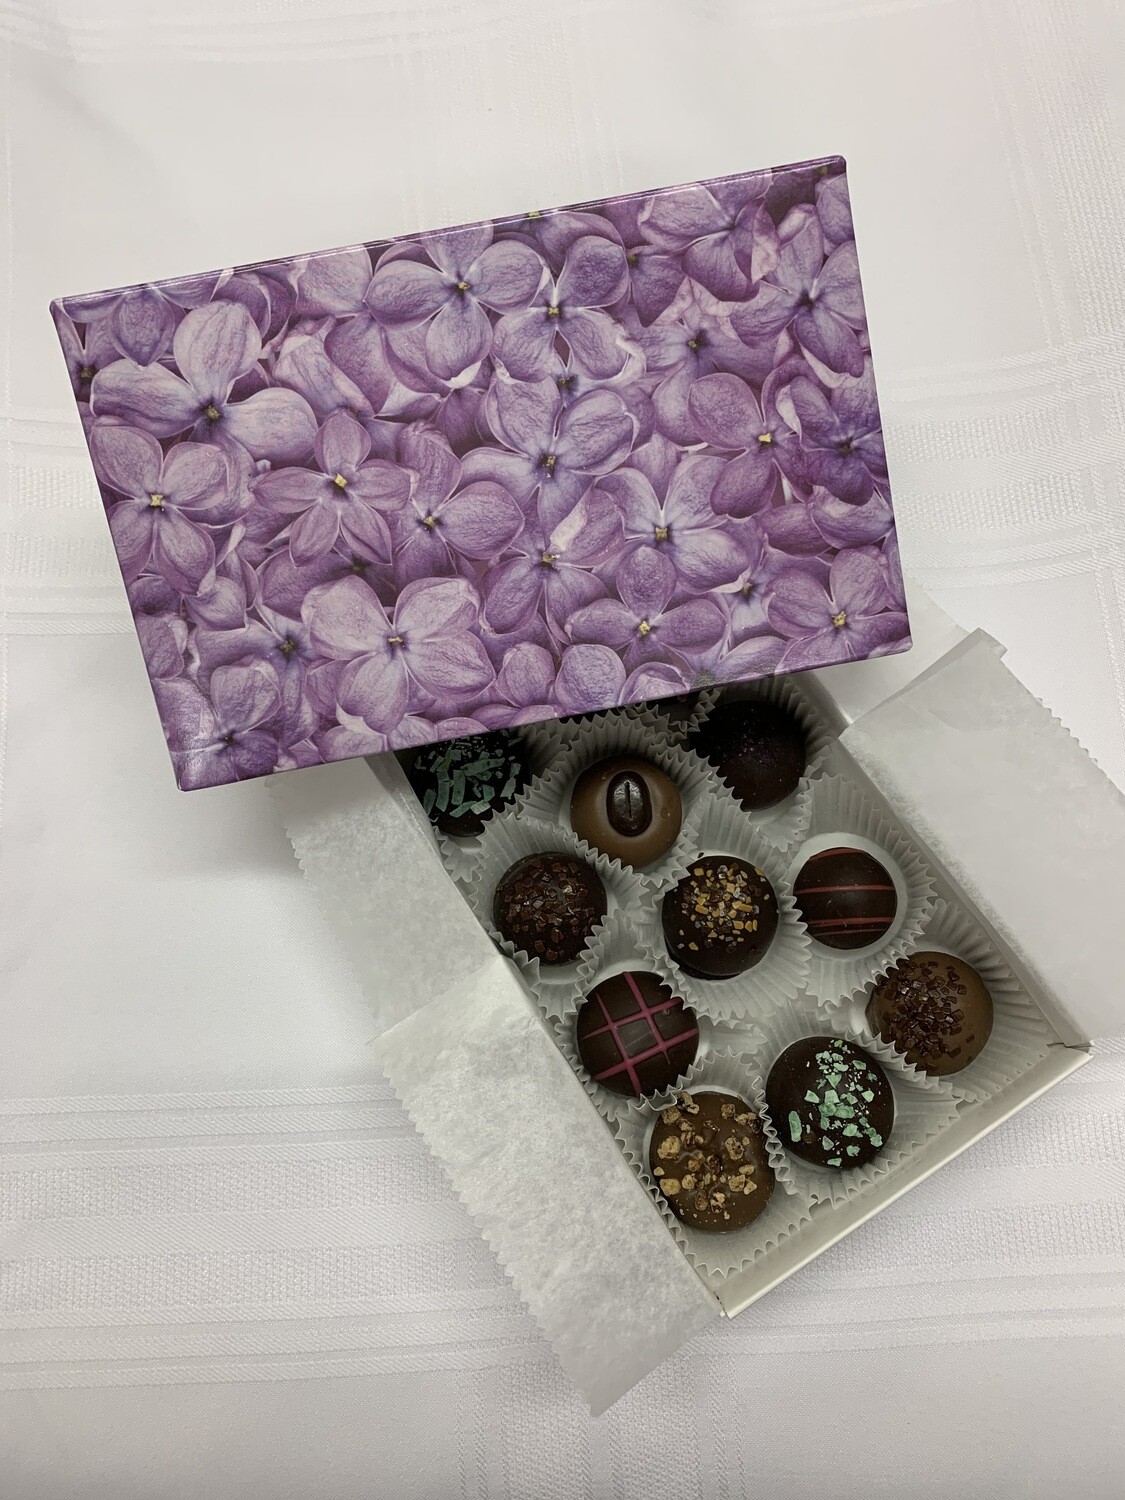 12 pc truffle box lilacs/roses or holiday